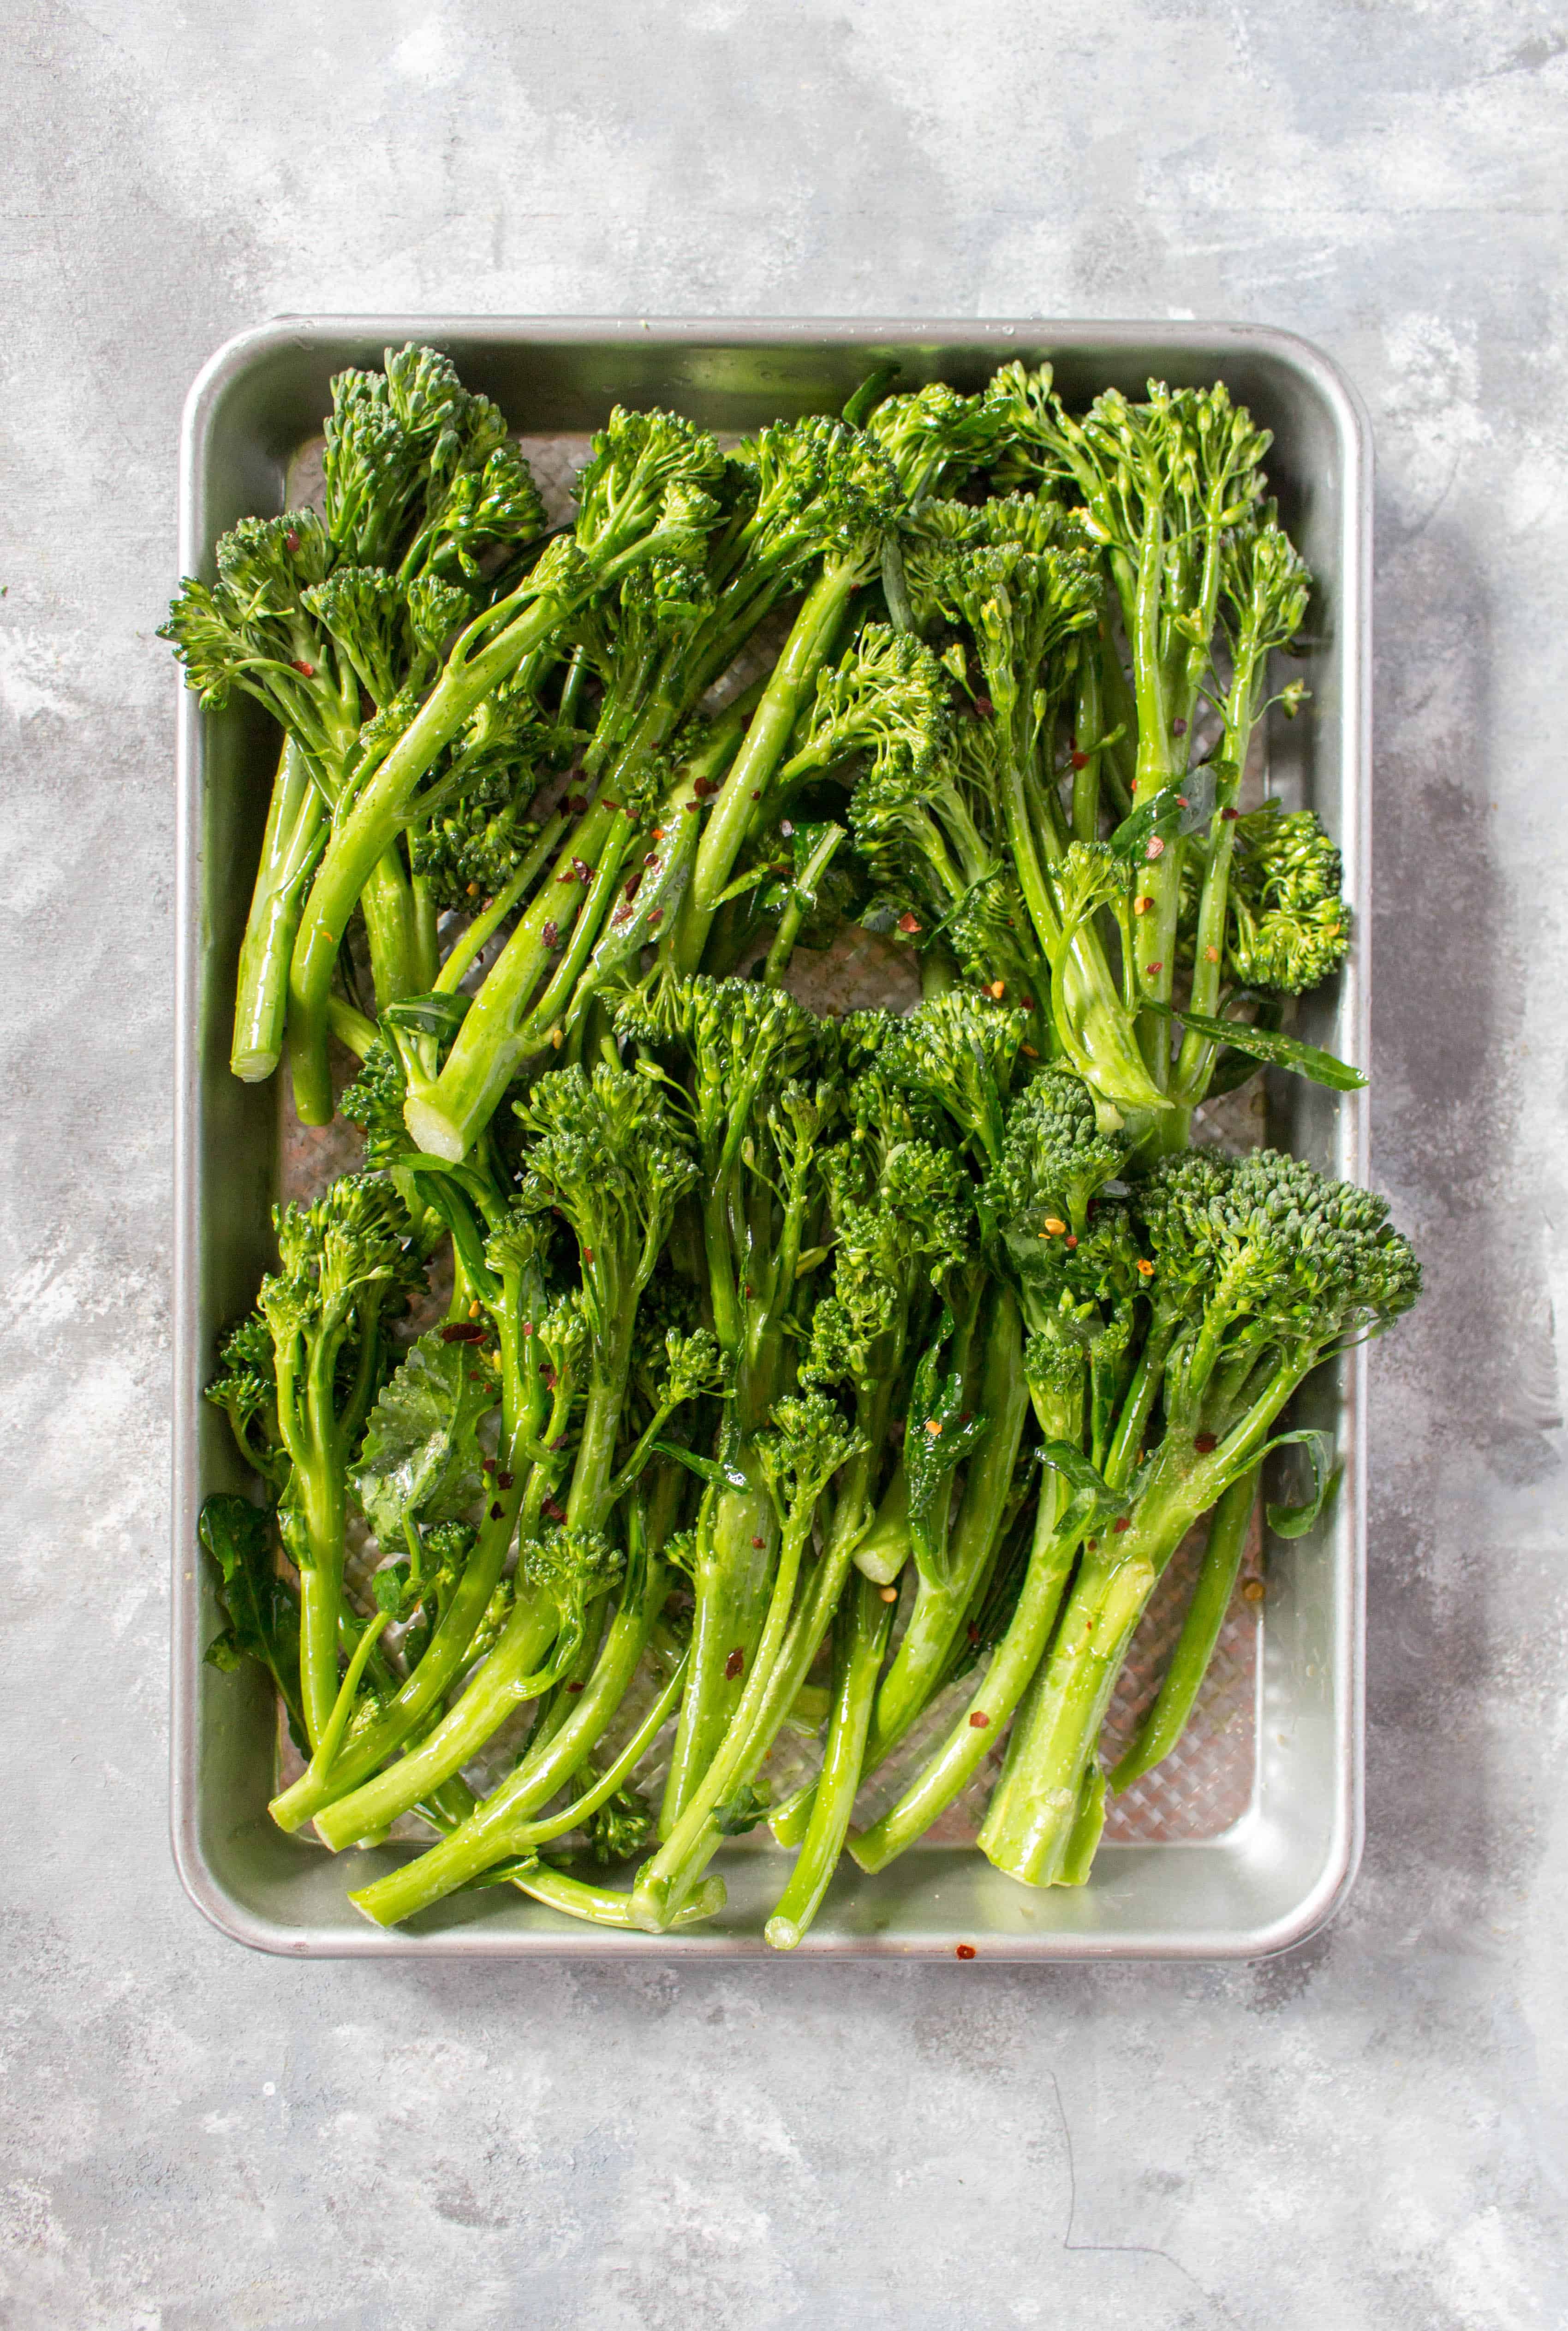 broccolini on a sheet pan ready for roasting.